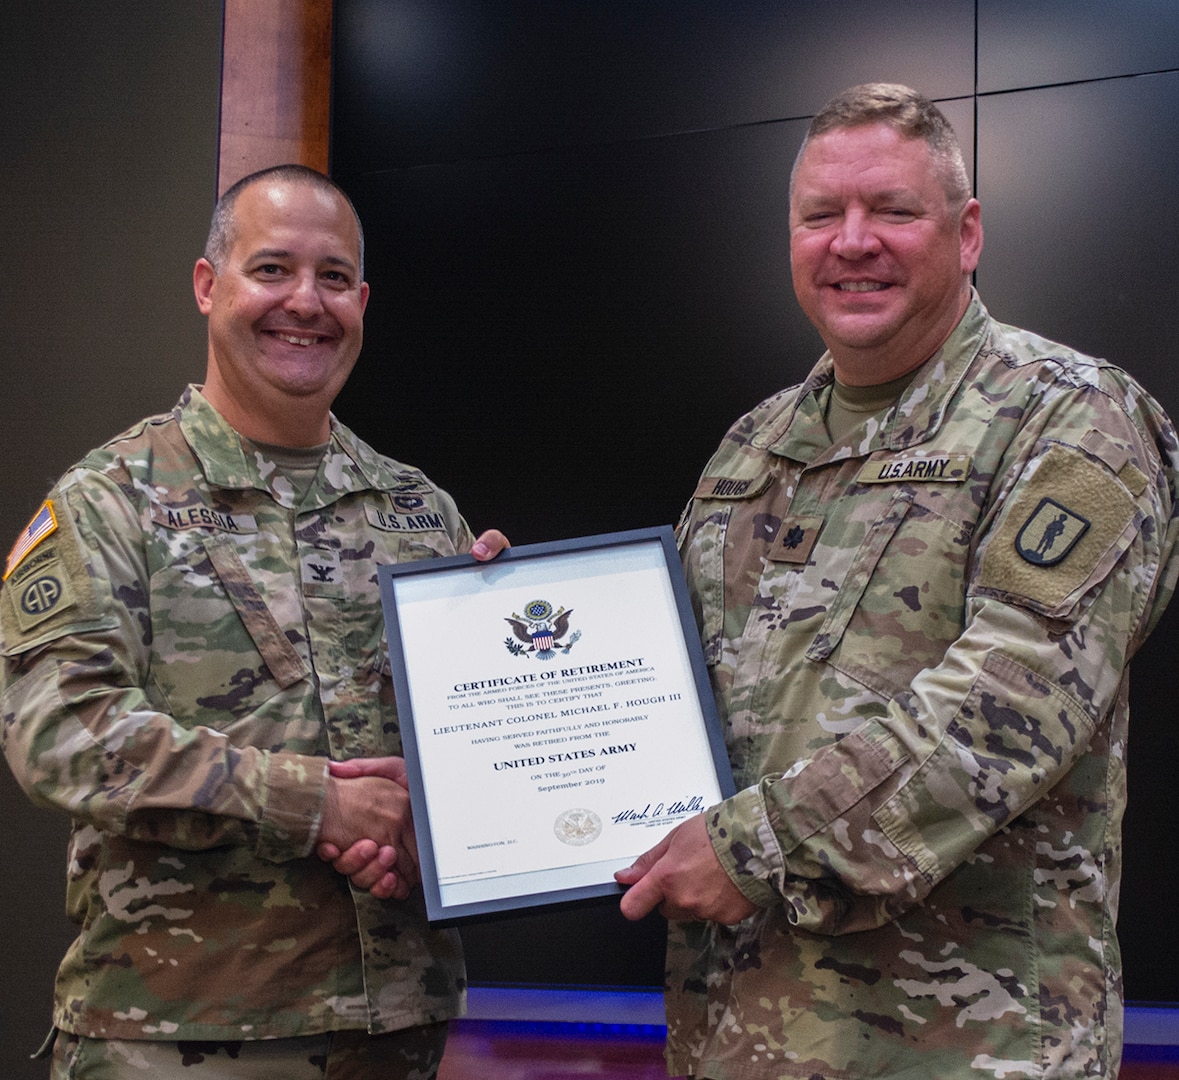 Certificate of Retirement presented to Lt. Col. Michael Hough